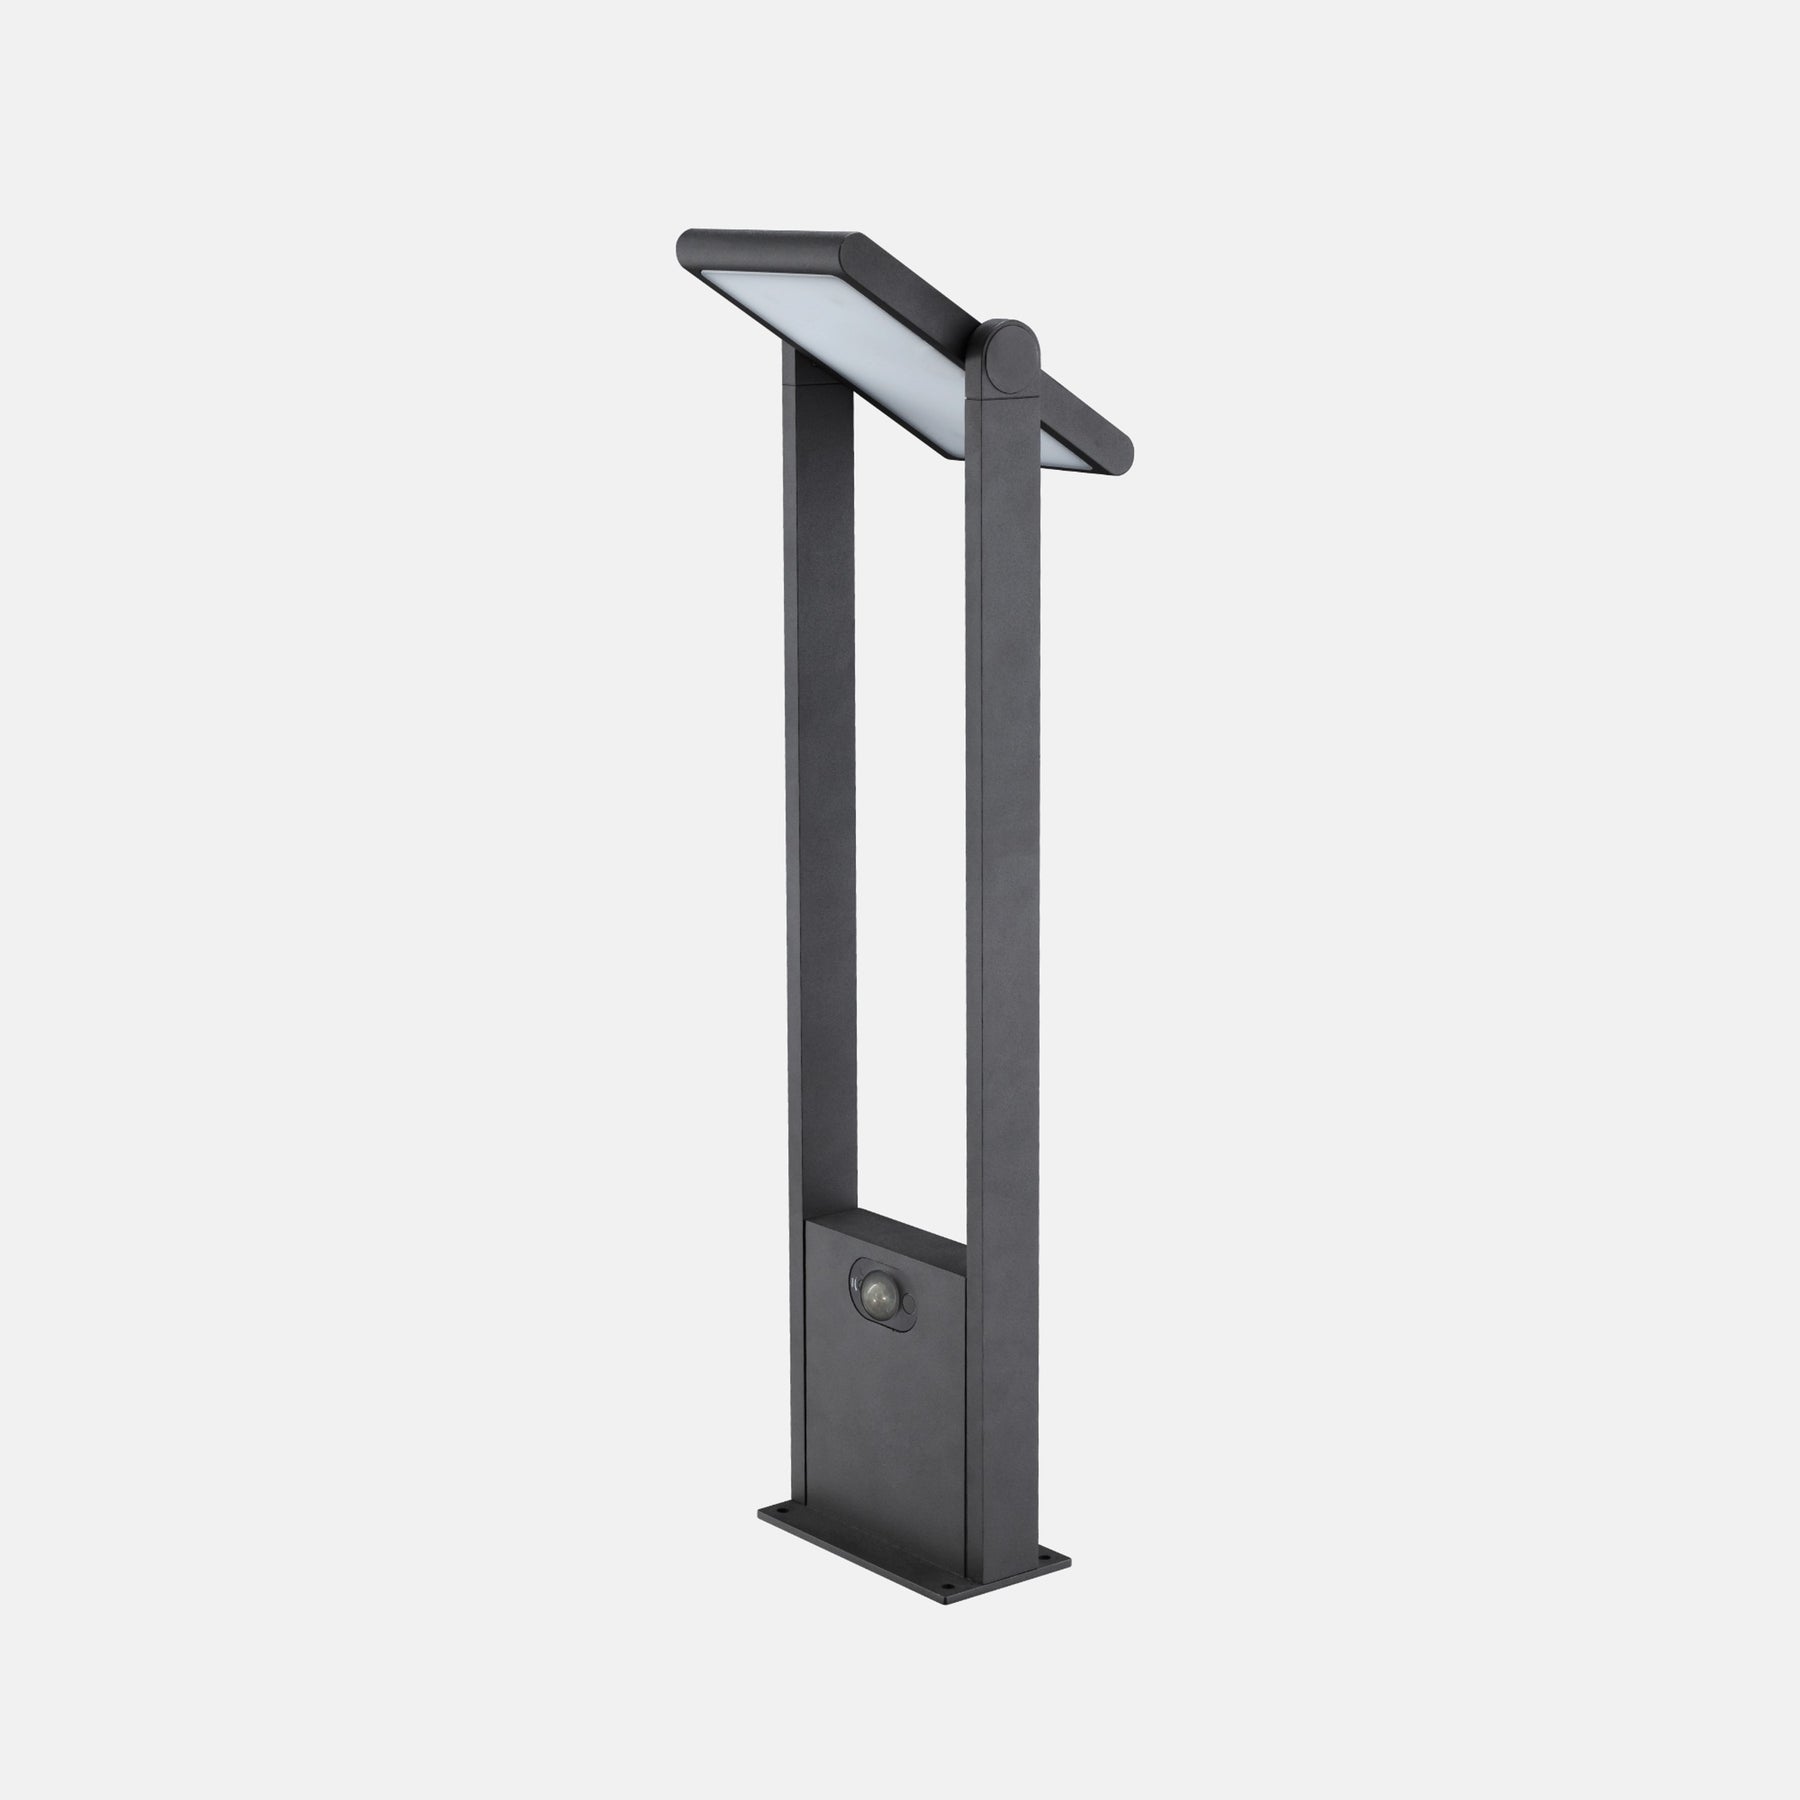 AMATERA Standby Outdoor LED Standleuchte Solar (60 cm)